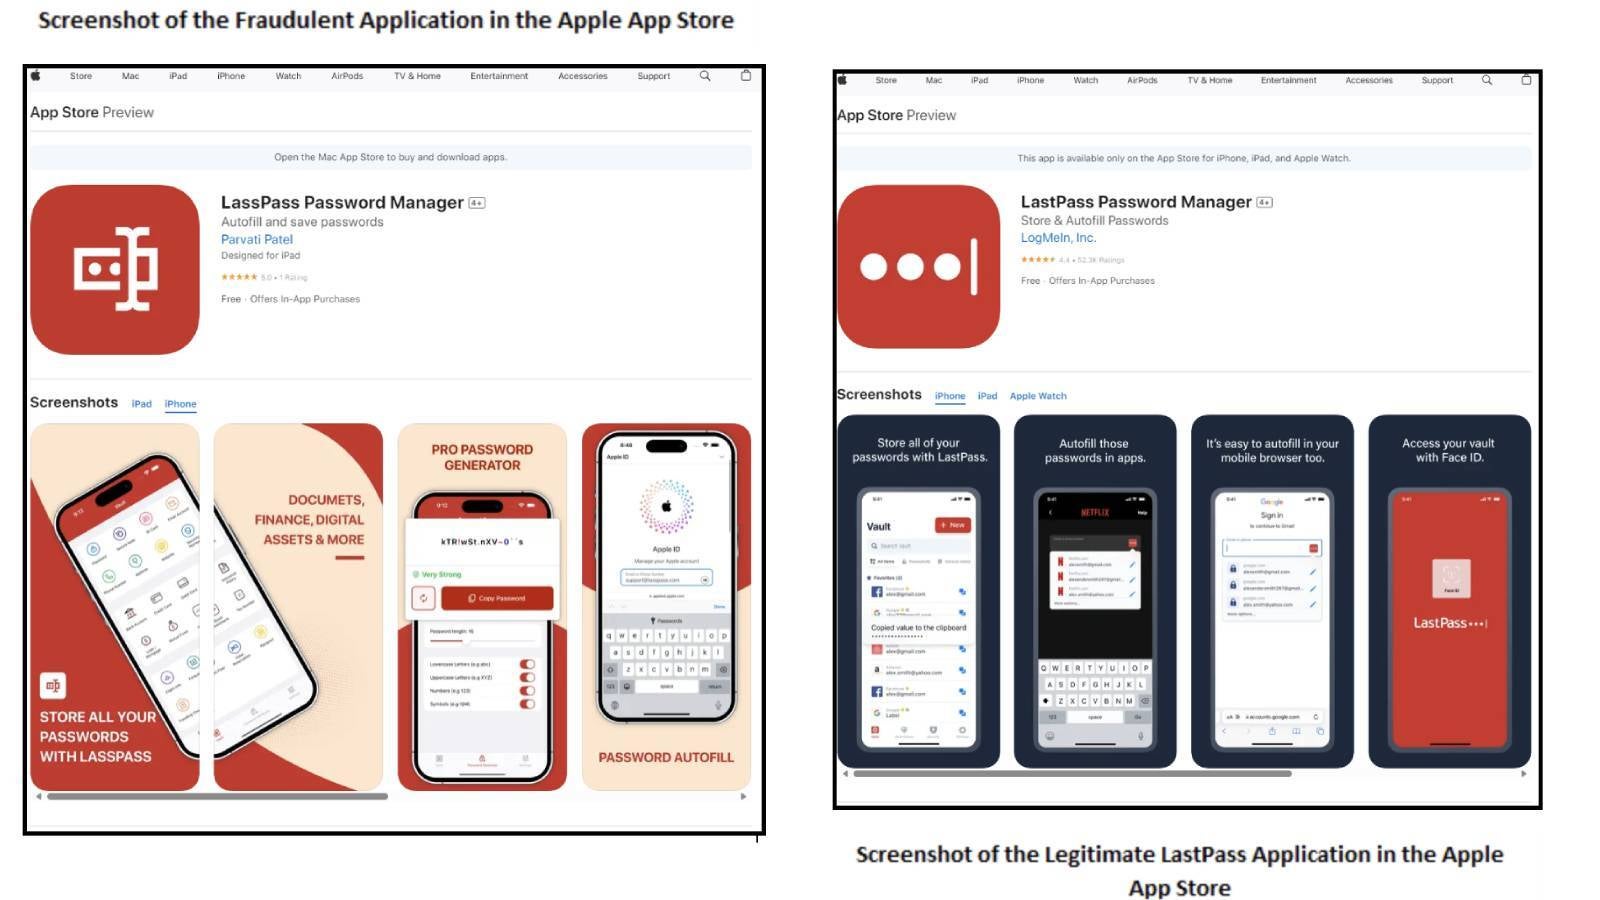 Apple takes a long time to remove a fake app masquerading as a popular password manager